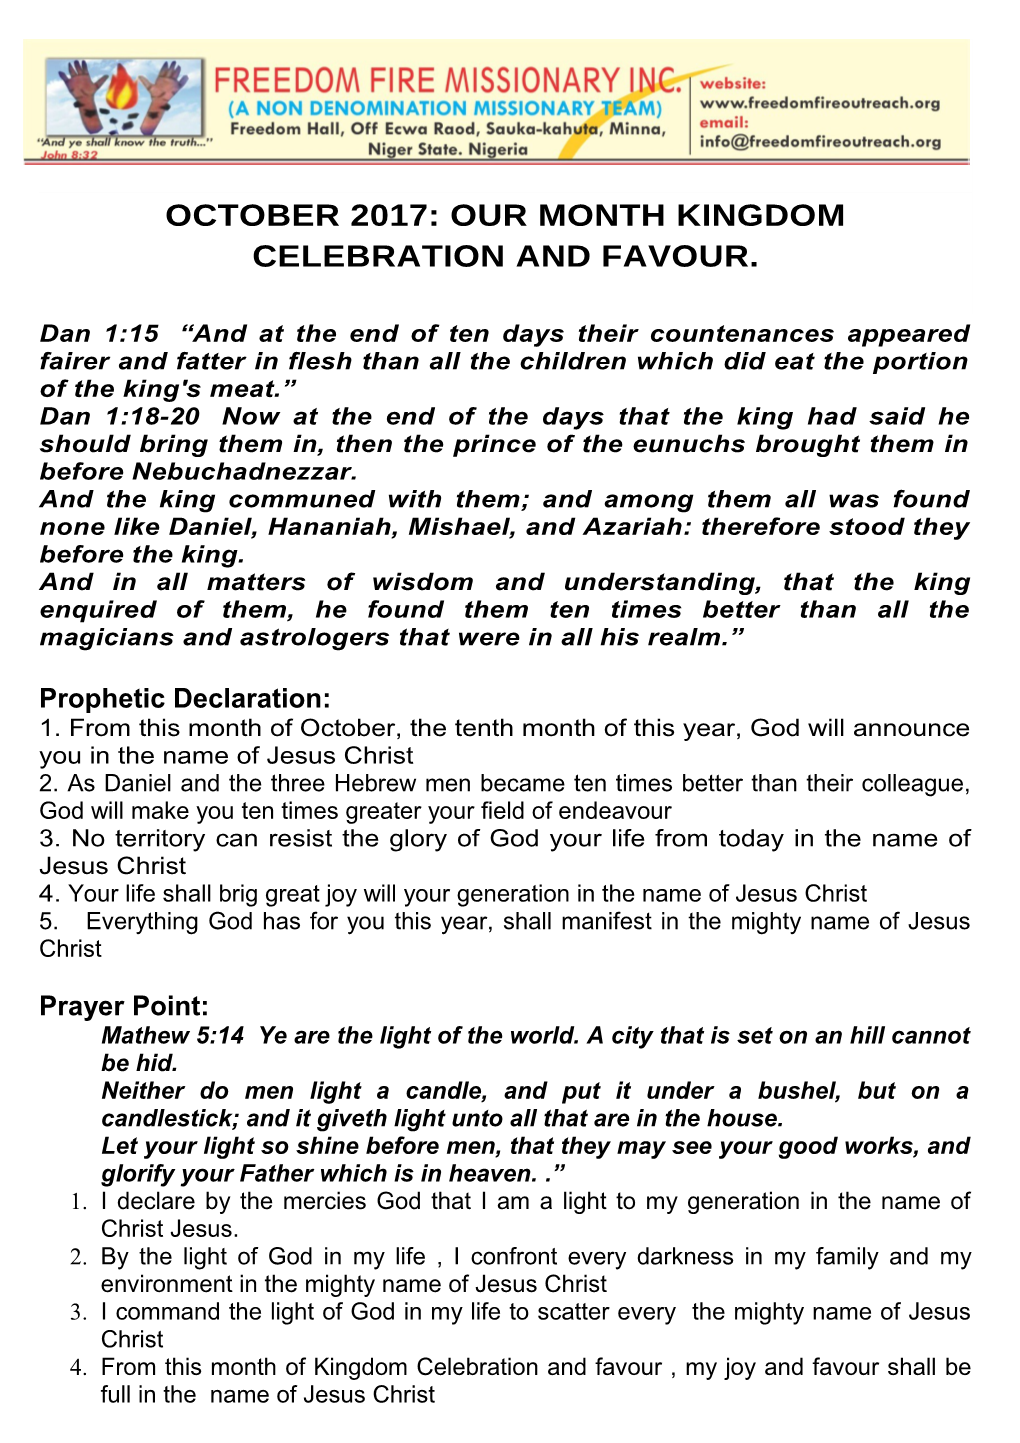 October 2017: Our Month Kingdom Celebration and Favour